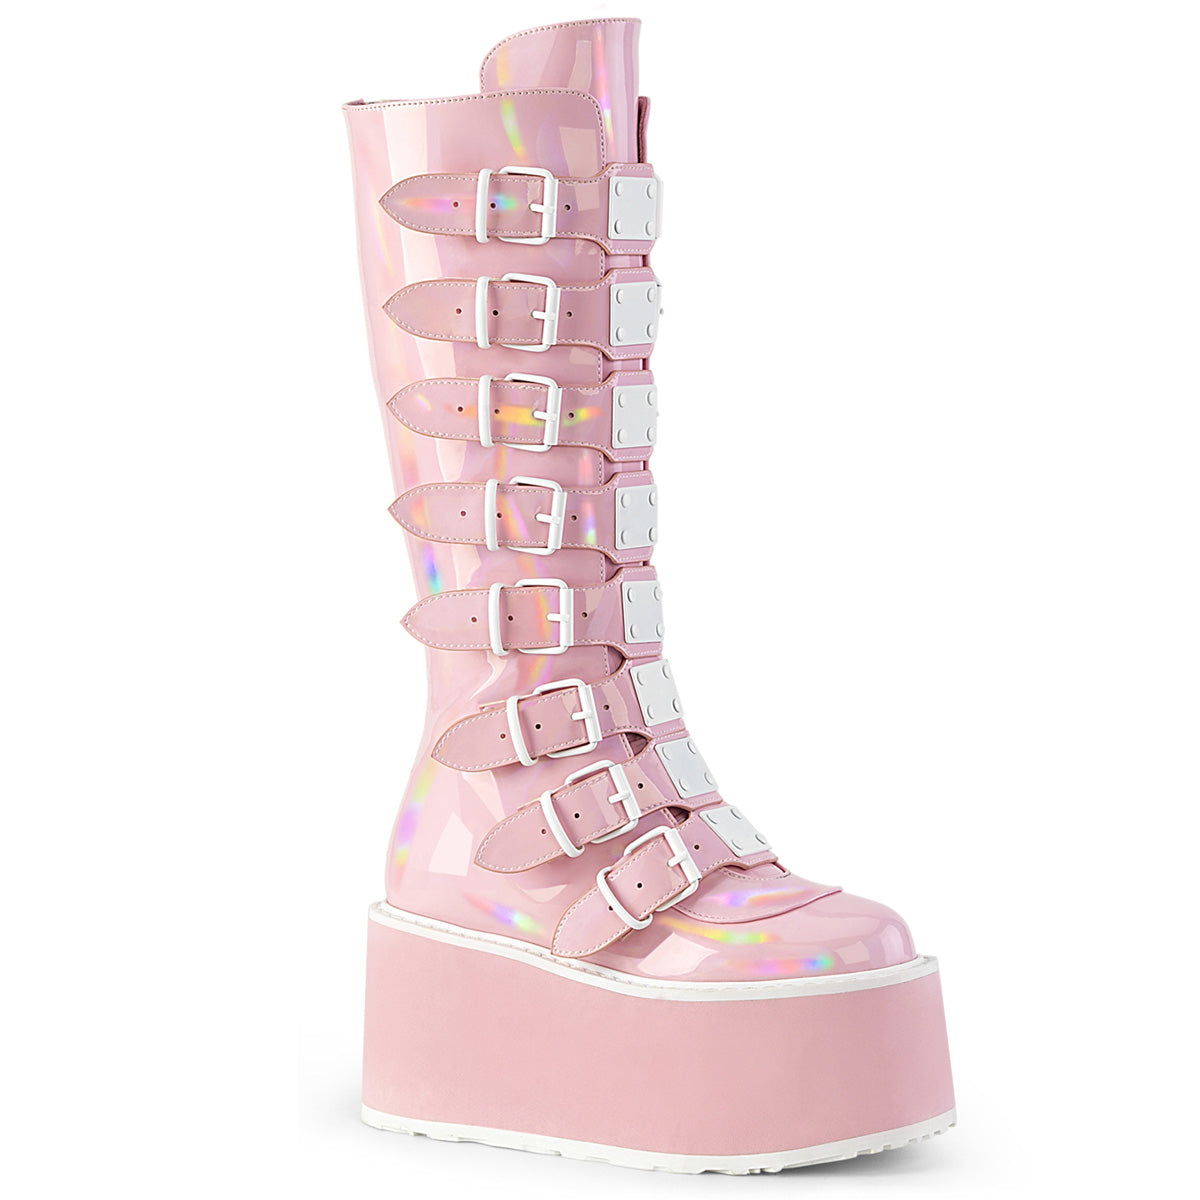 DemoniaCult  Boots DAMNED-318 B. Pink Holo Pat